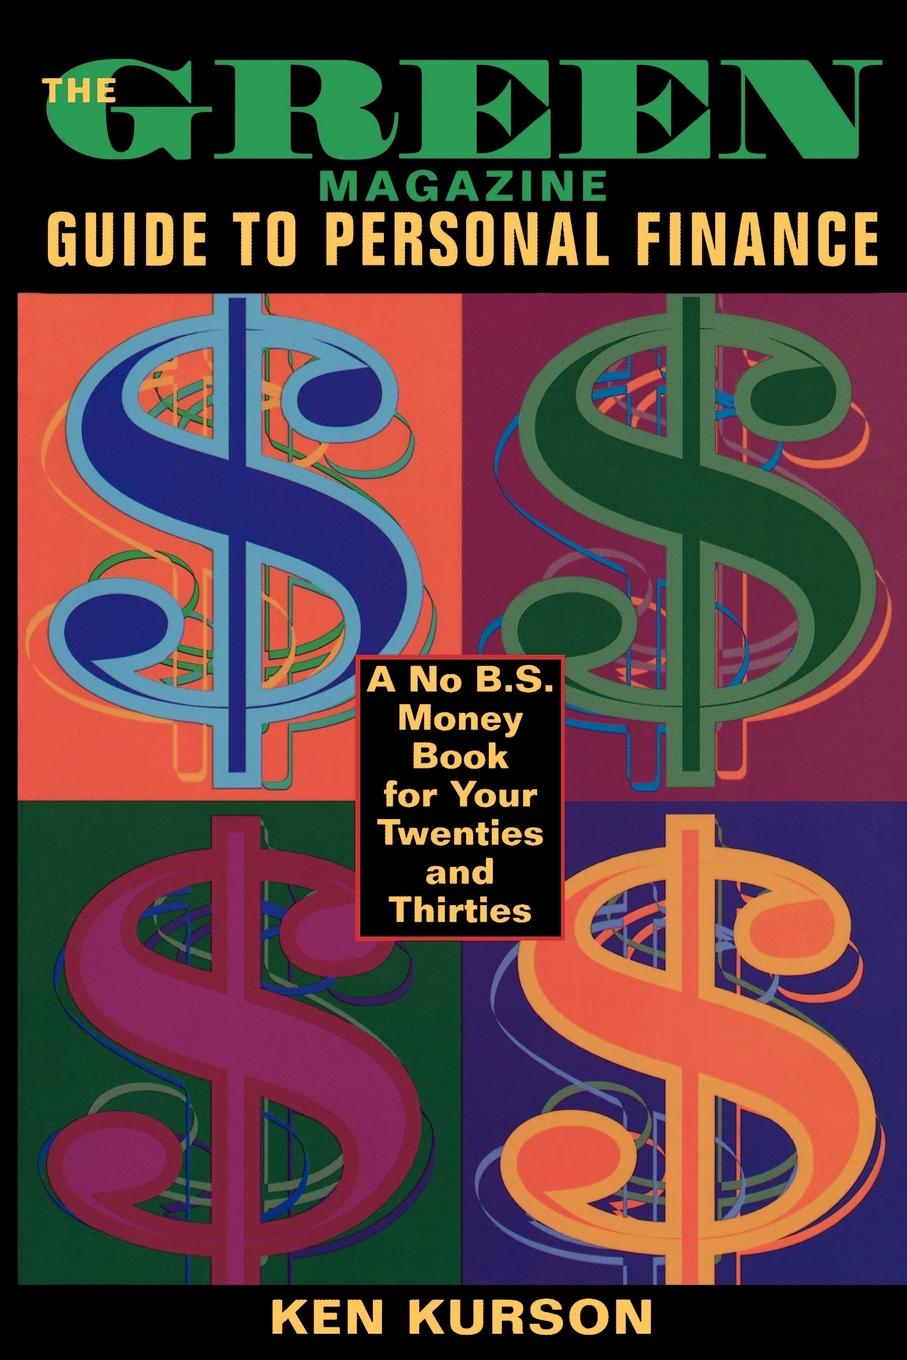 The Green Magazine Guide to Personal Finance. A No-B.S. Book for Your Twenties and Thirties